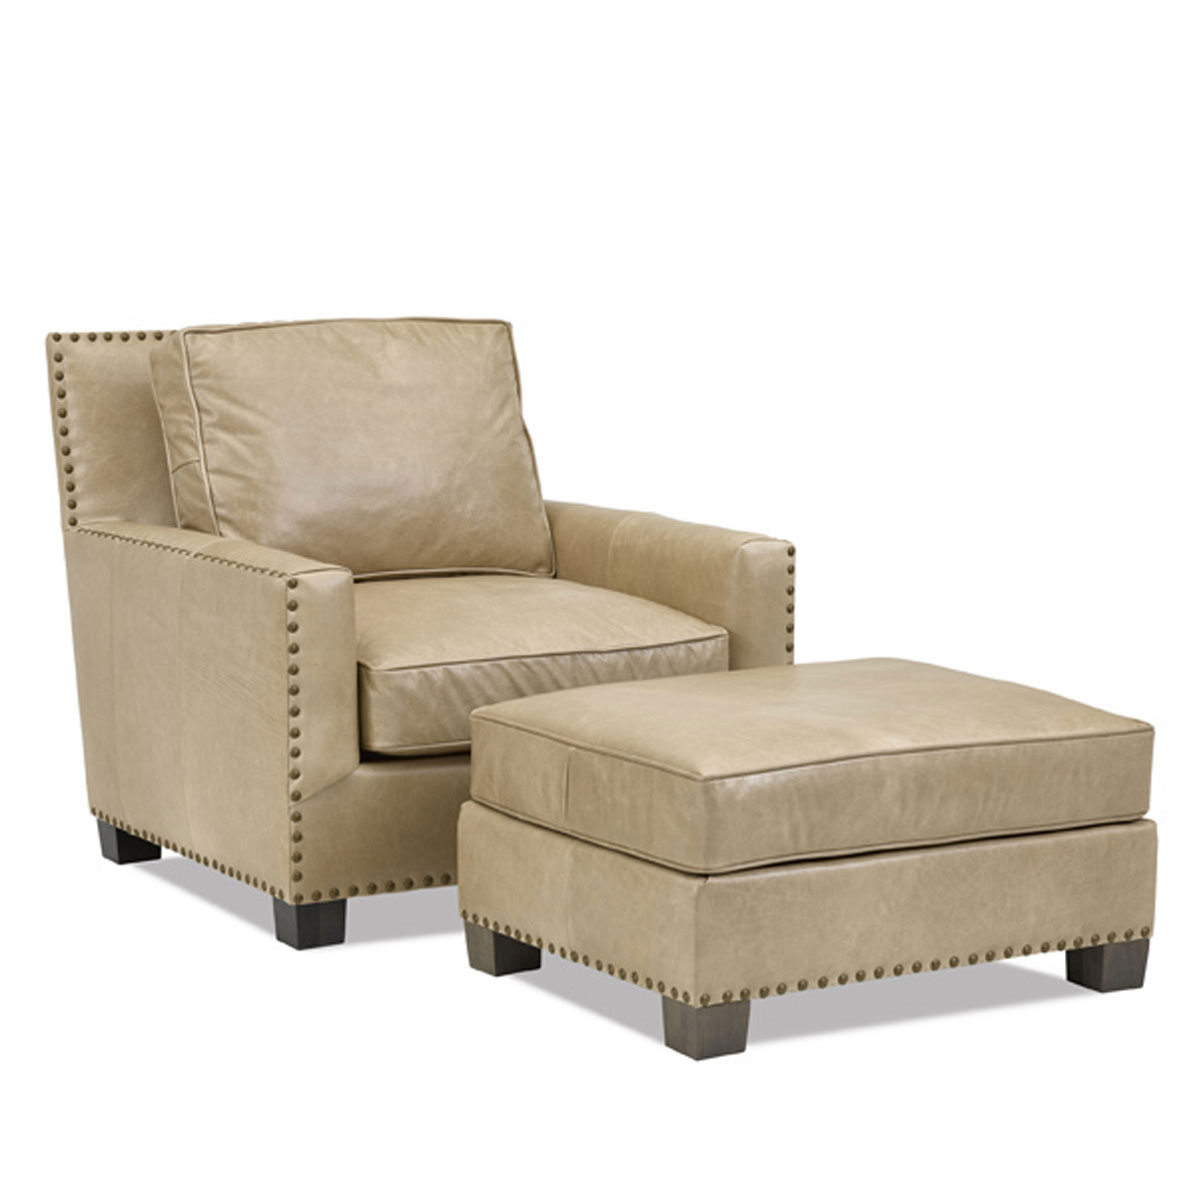 Leathercraft 933-02 Shelly Chair and 933-03 Shelly Ottoman